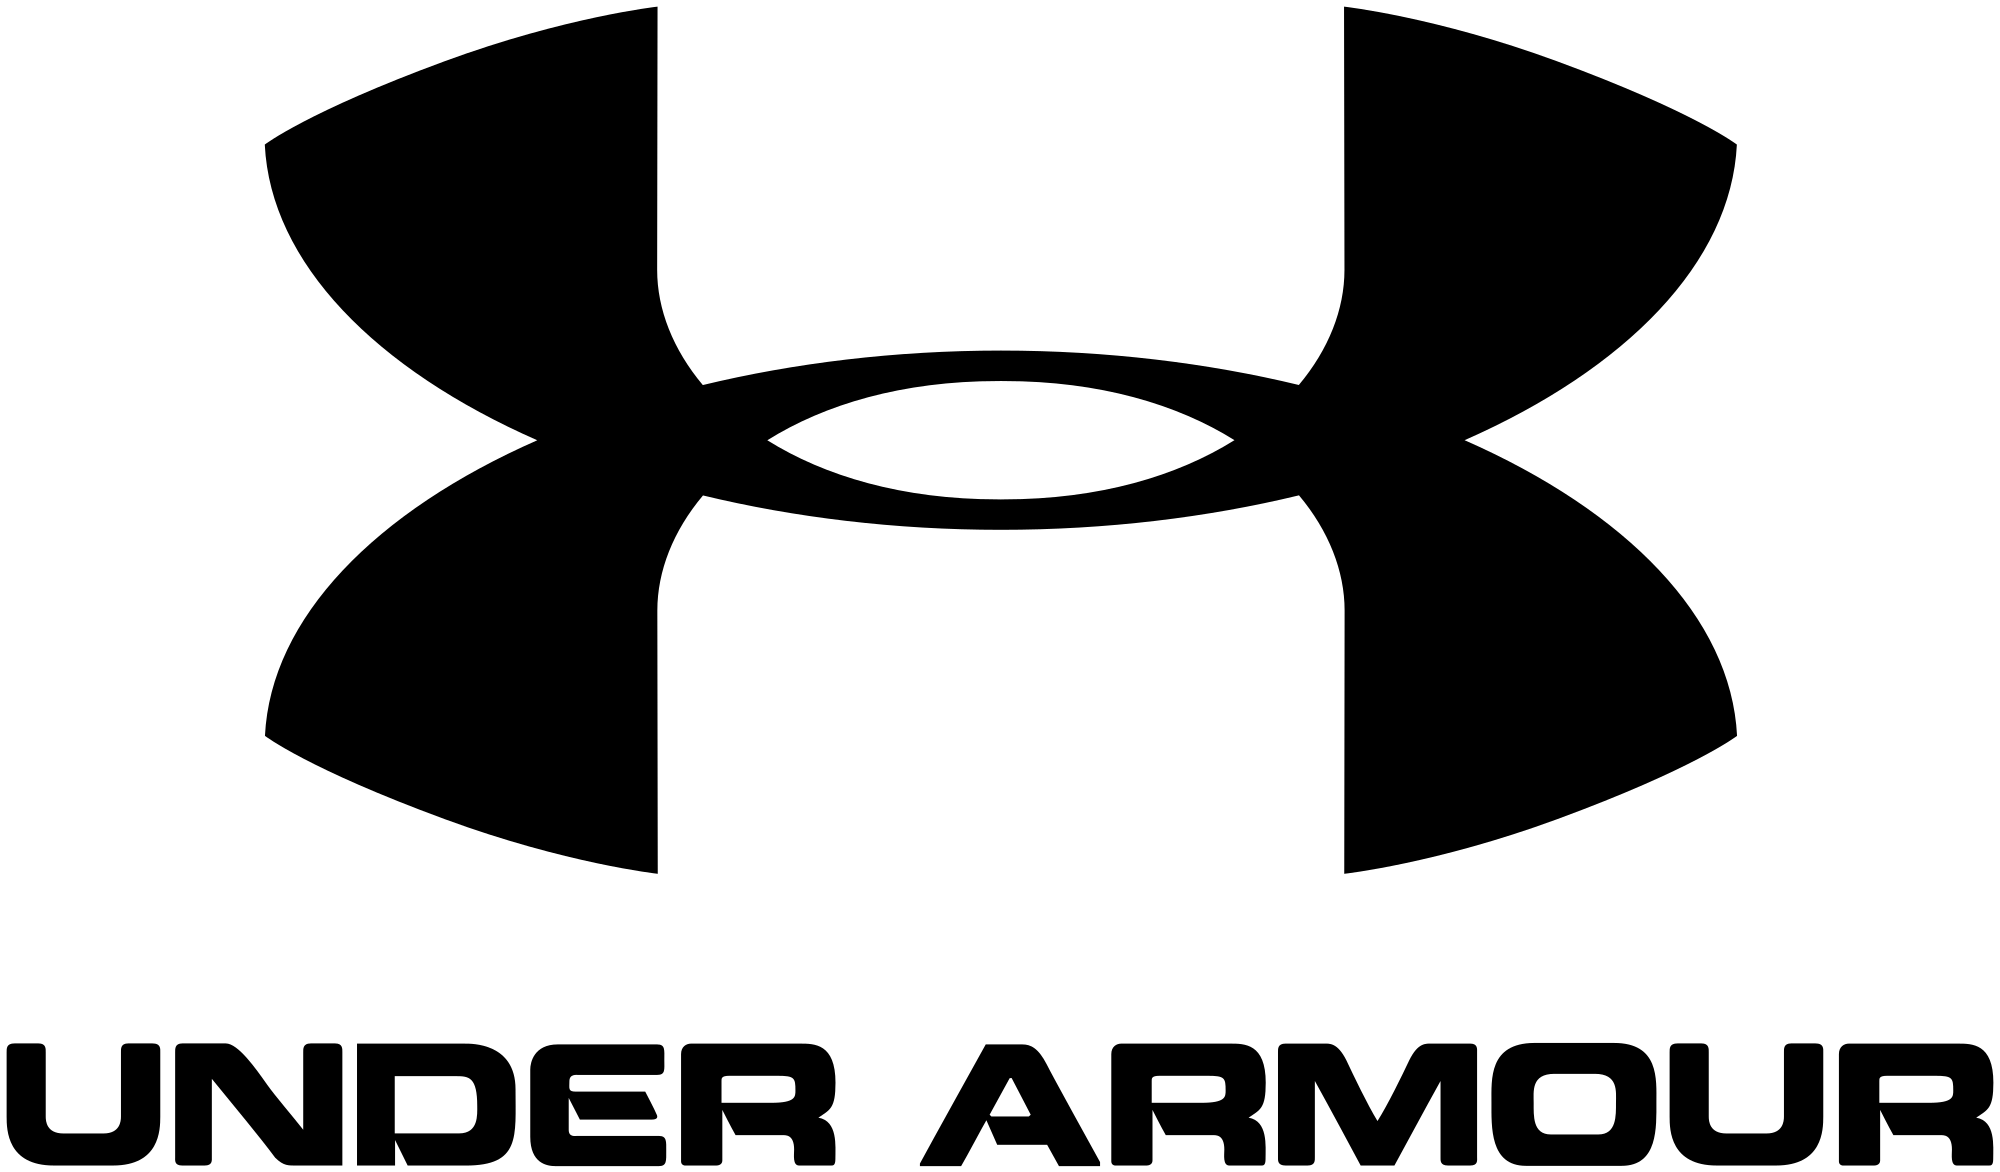 Under Armour Logo - File:Under armour logo.svg - Wikimedia Commons